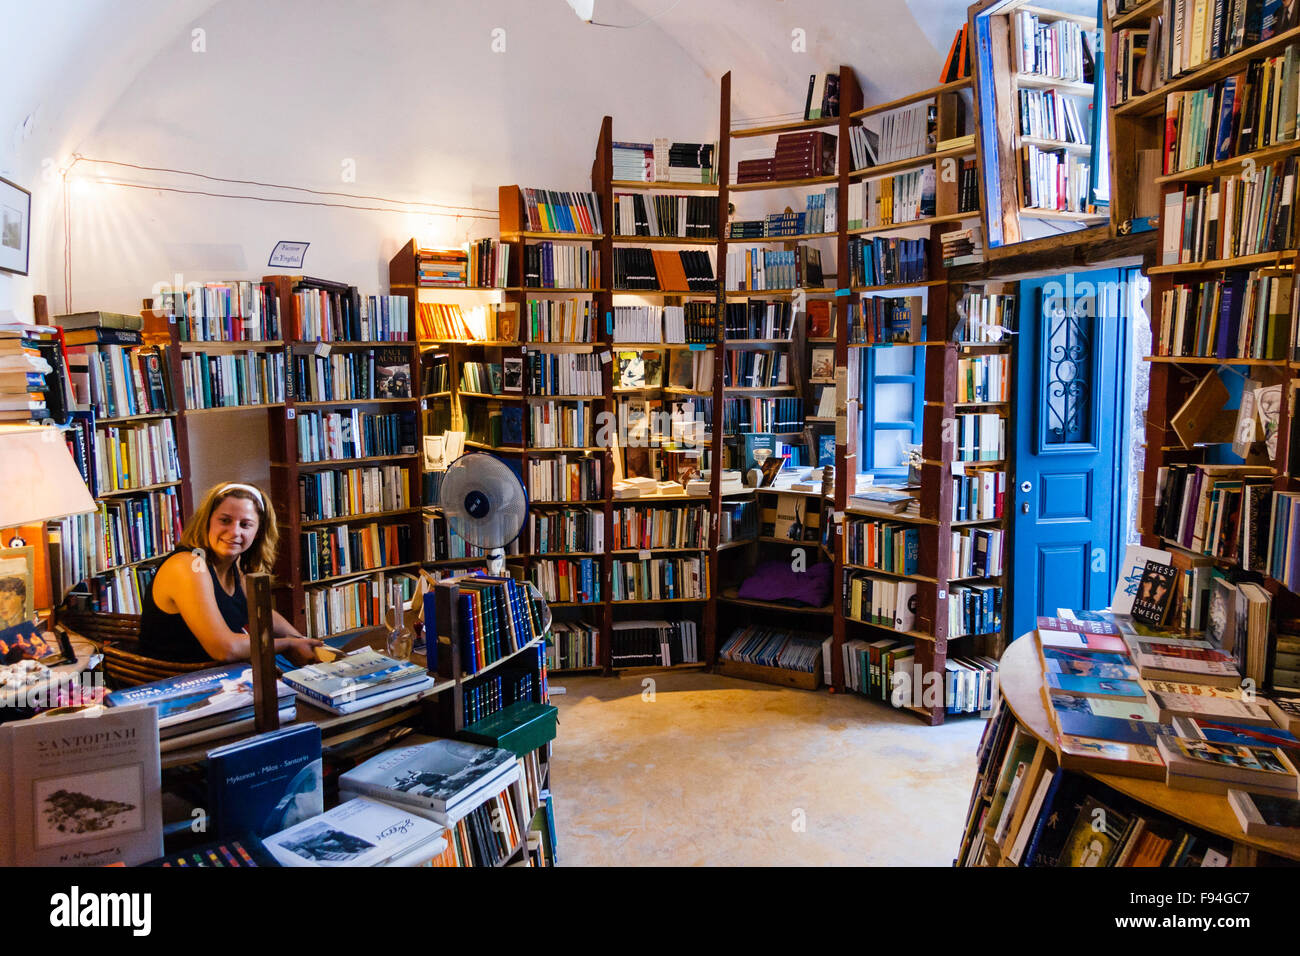 Santorini, Oia. Atlantis second hand bookshop. Interior,  walls covered in wooden shelves full of books, woman shop assistant sitting at desk, smiling. Stock Photo